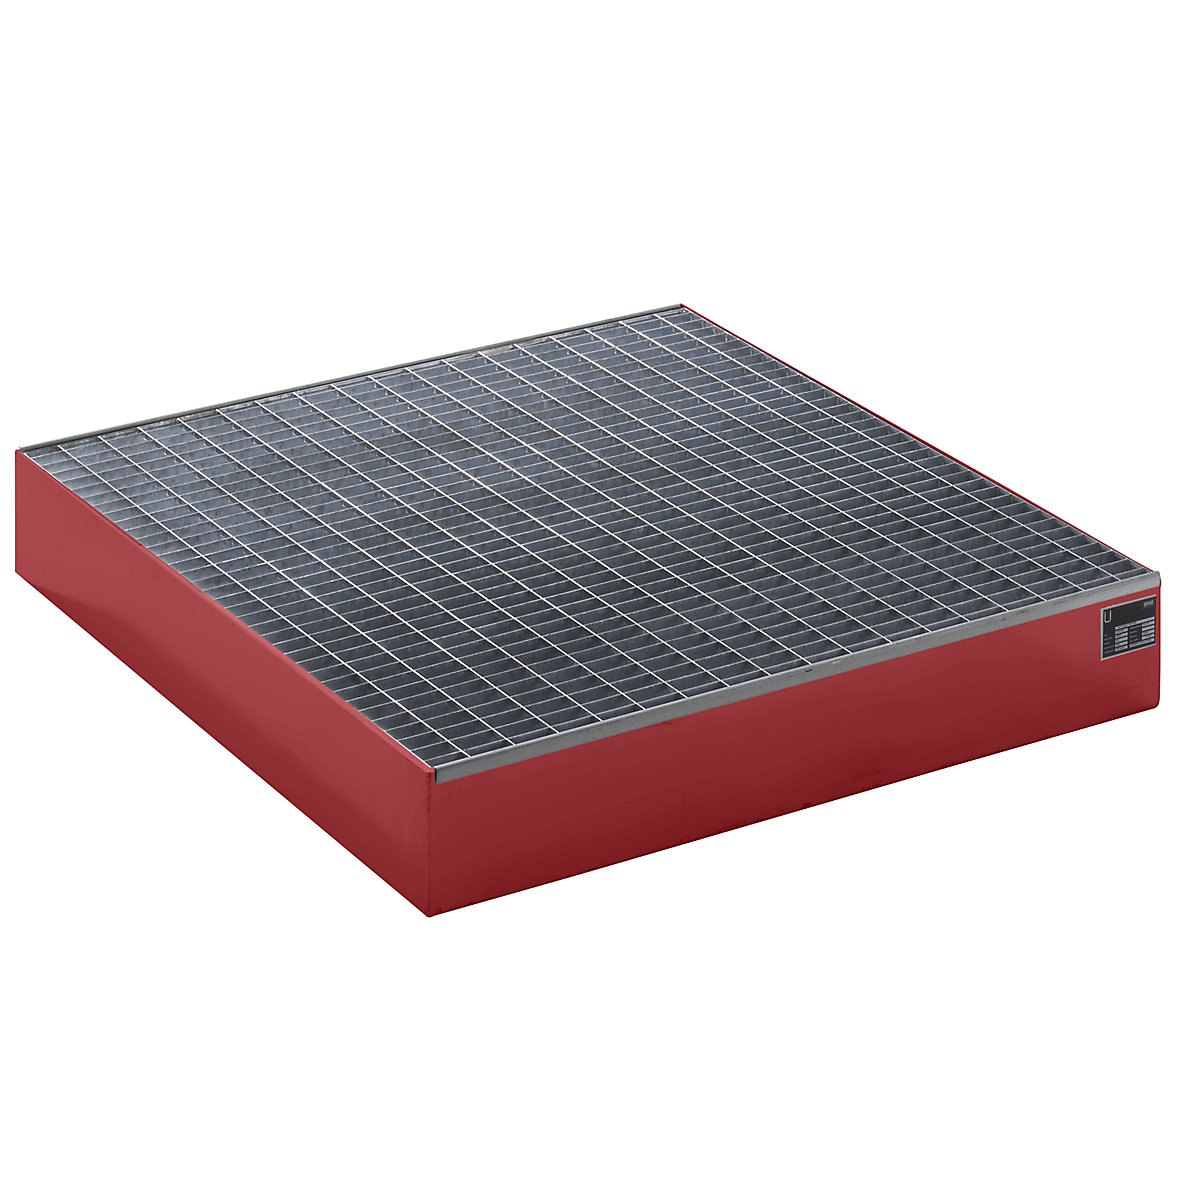 EUROKRAFTbasic – Pallet sump tray, LxWxH 1200 x 1200 x 185 mm, red RAL 3000, with grate